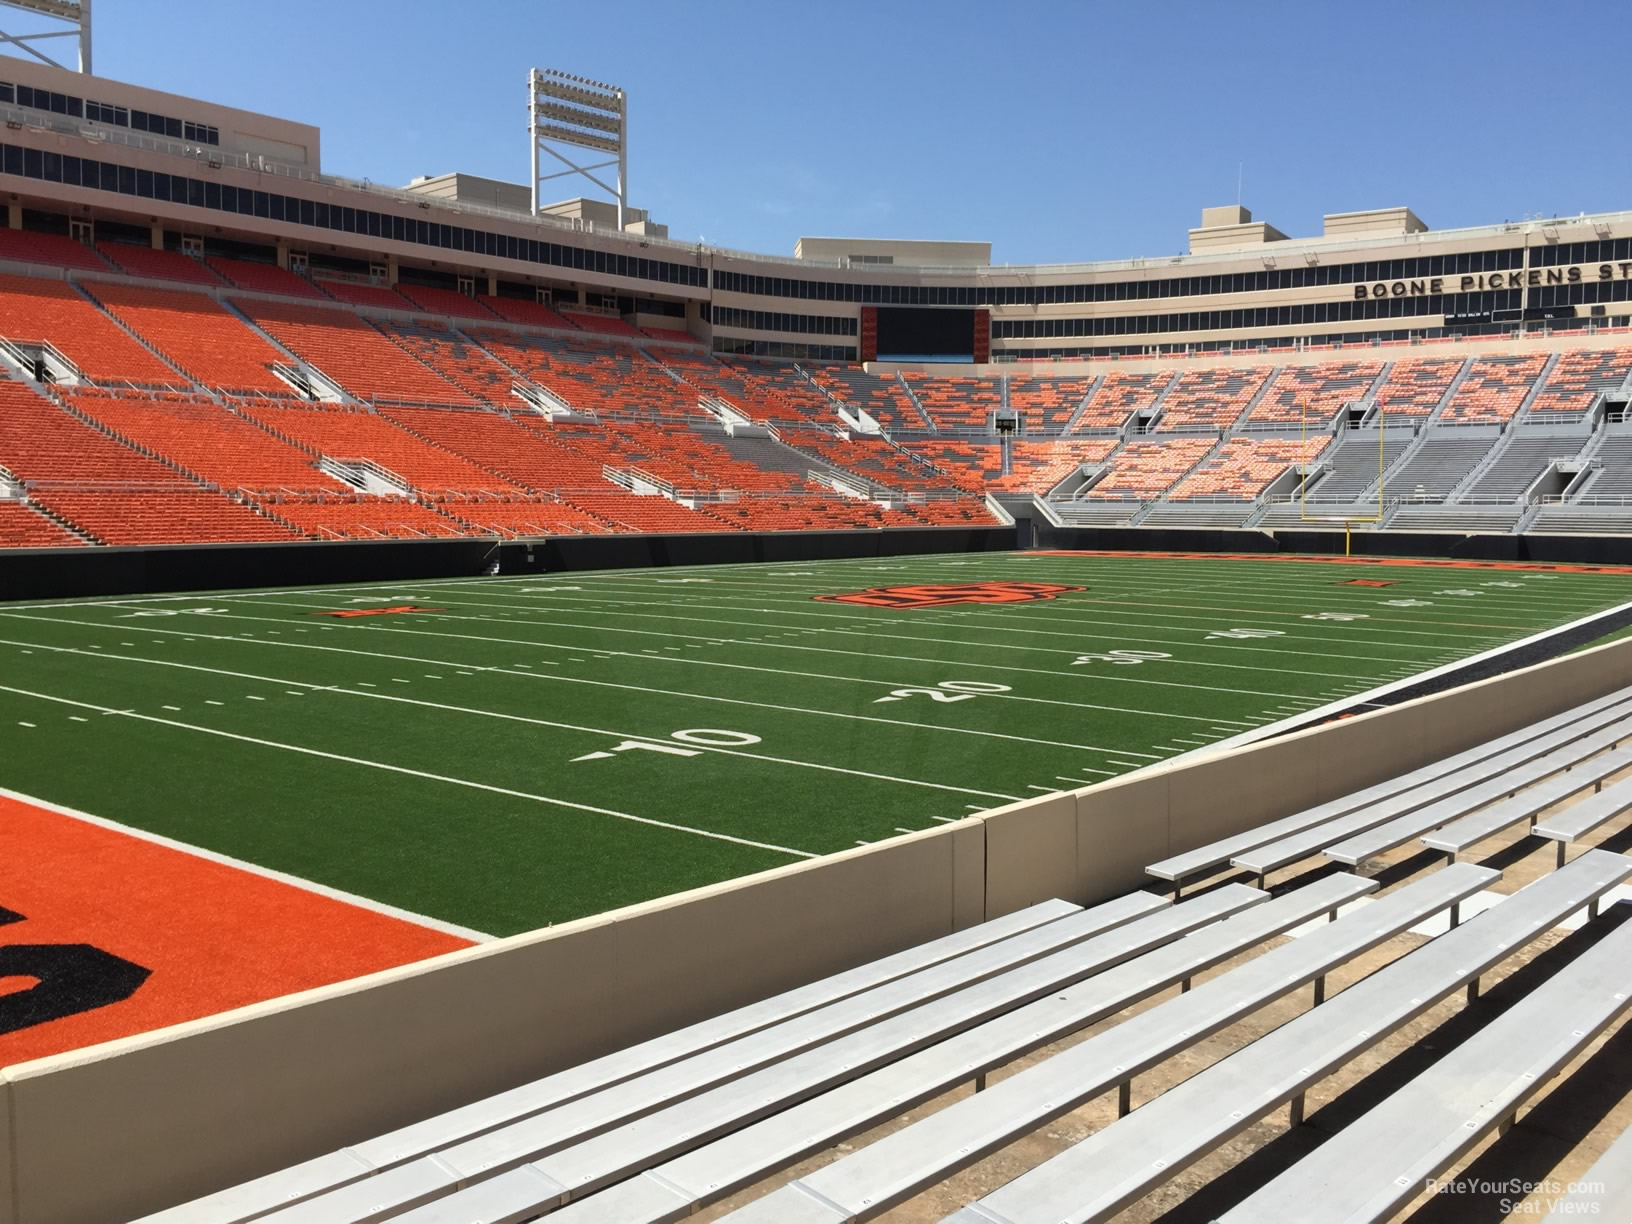 section 120, row 10 seat view  - boone pickens stadium